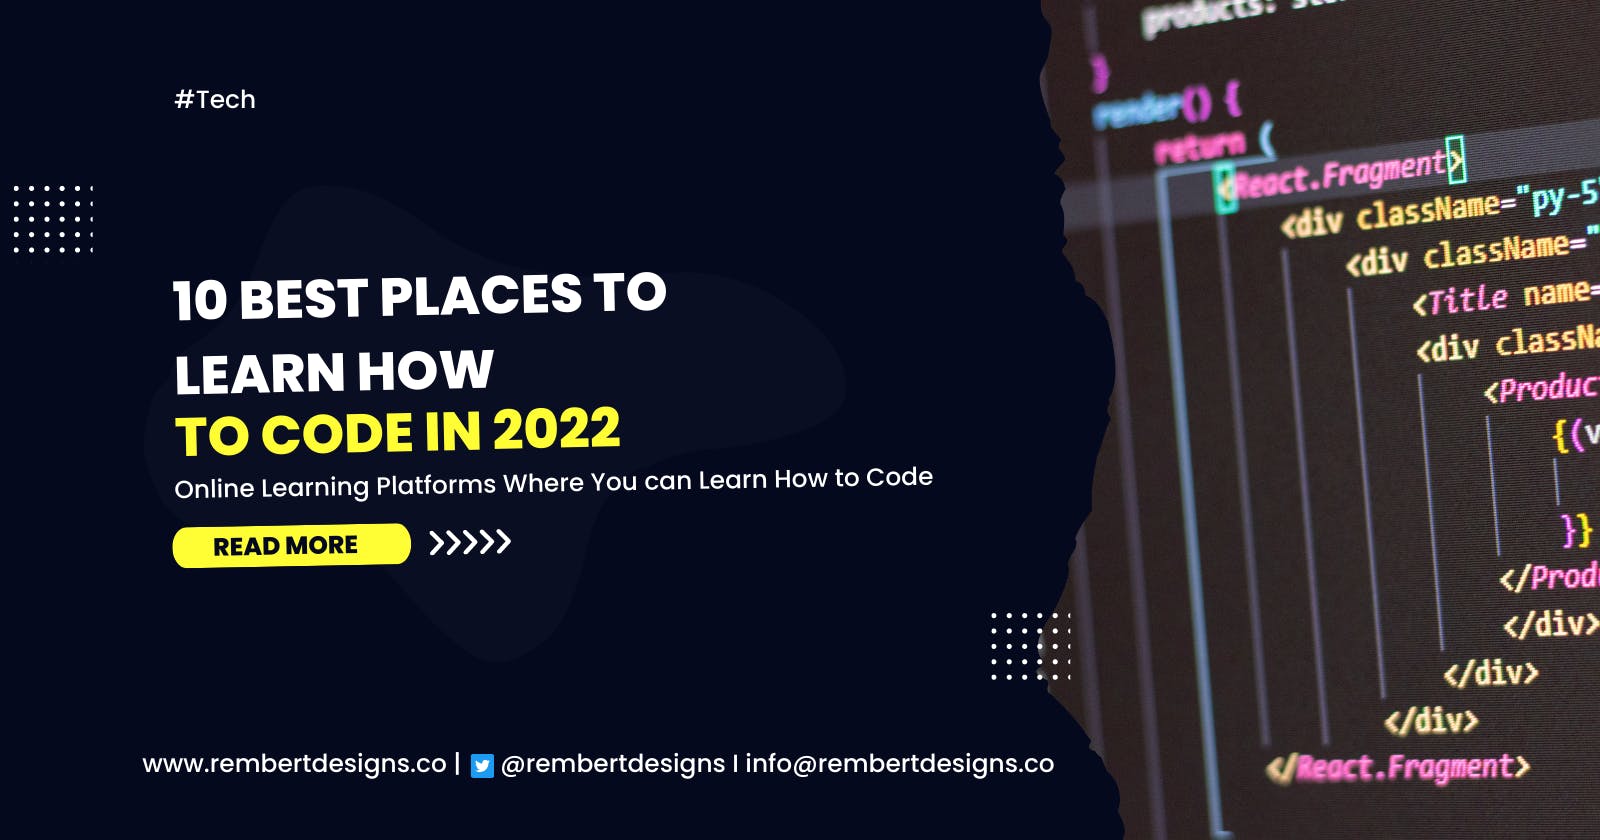 10 Best Places to Learn How to Code in 2022